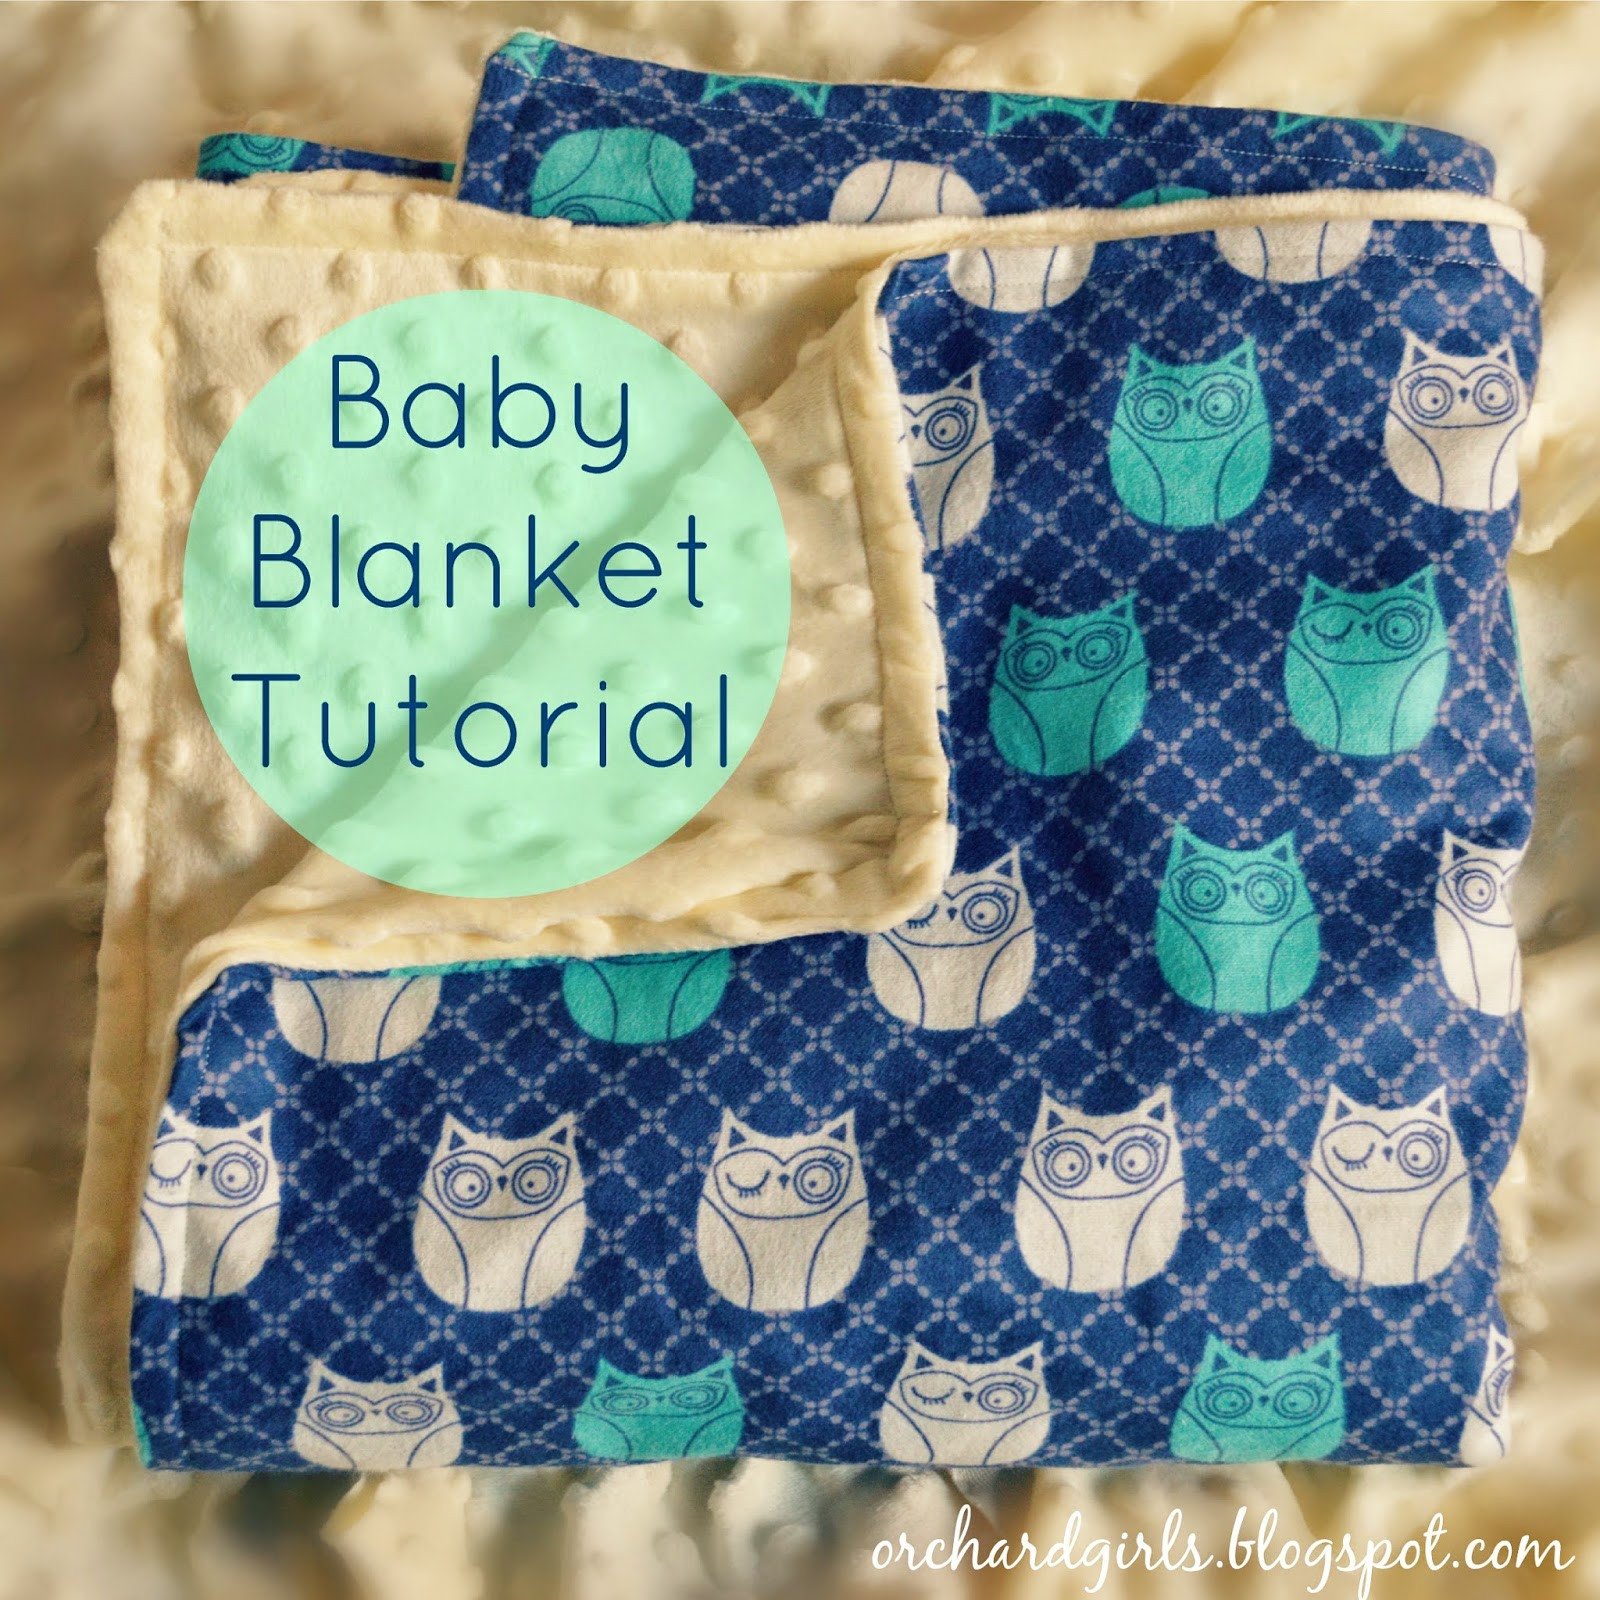 Baby Blankets DIY
 Orchard Girls Super easy DIY Baby Blanket Tutorial with minky and cuddle fabric